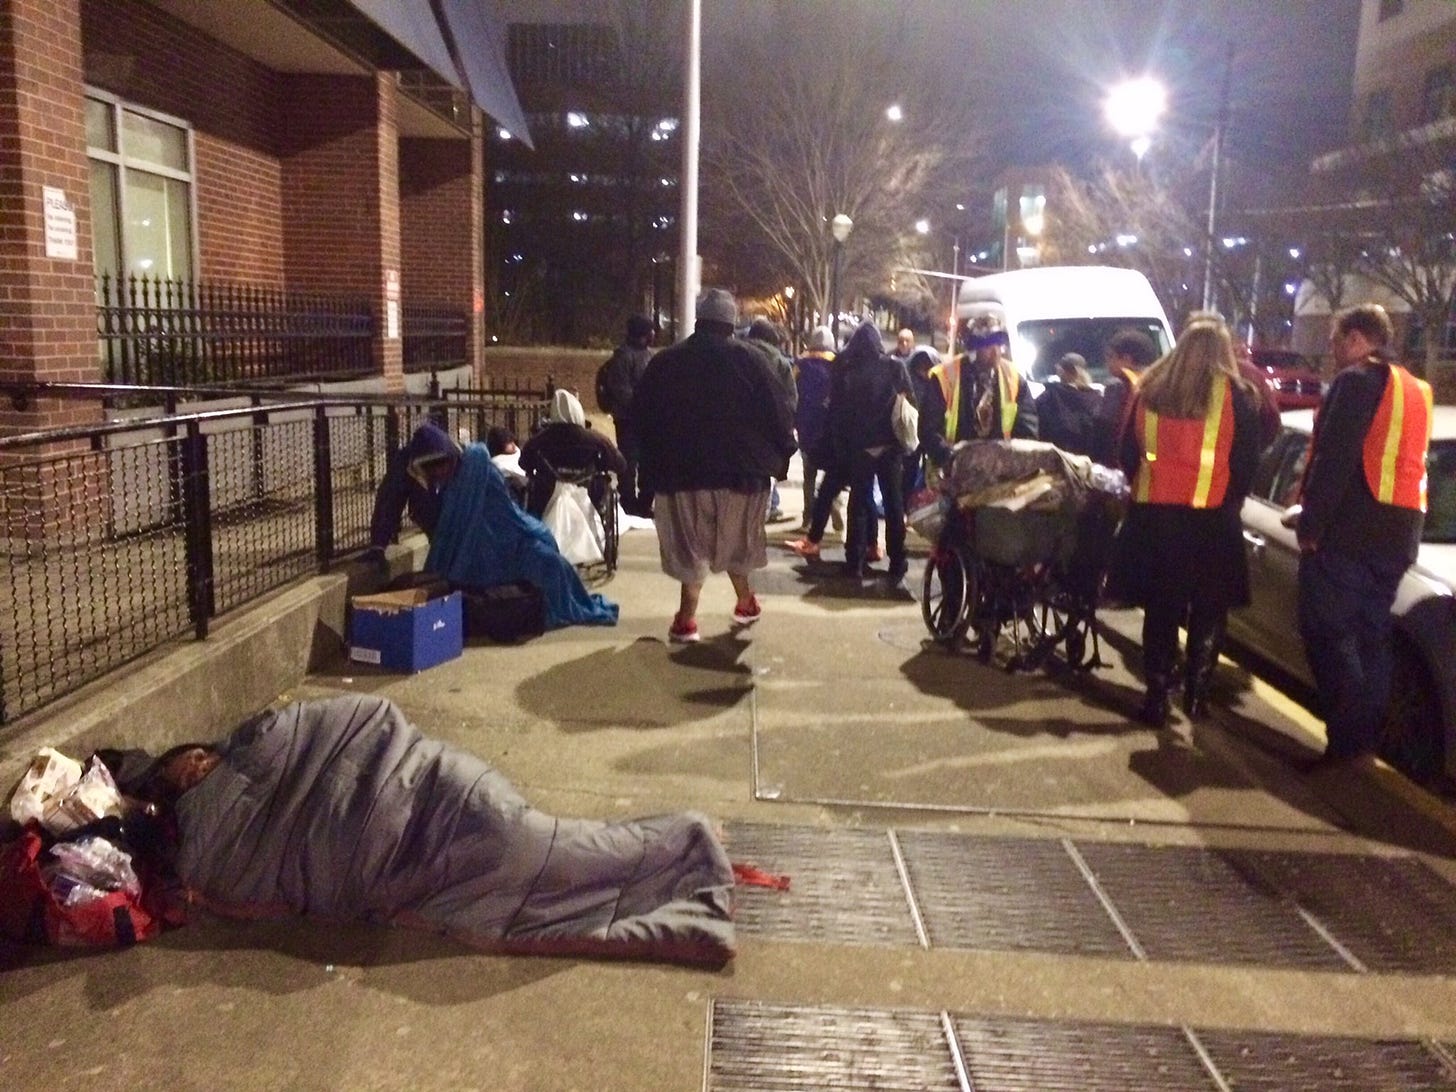 Atlanta's annual homeless count: Keeping stats on misery | Torpy